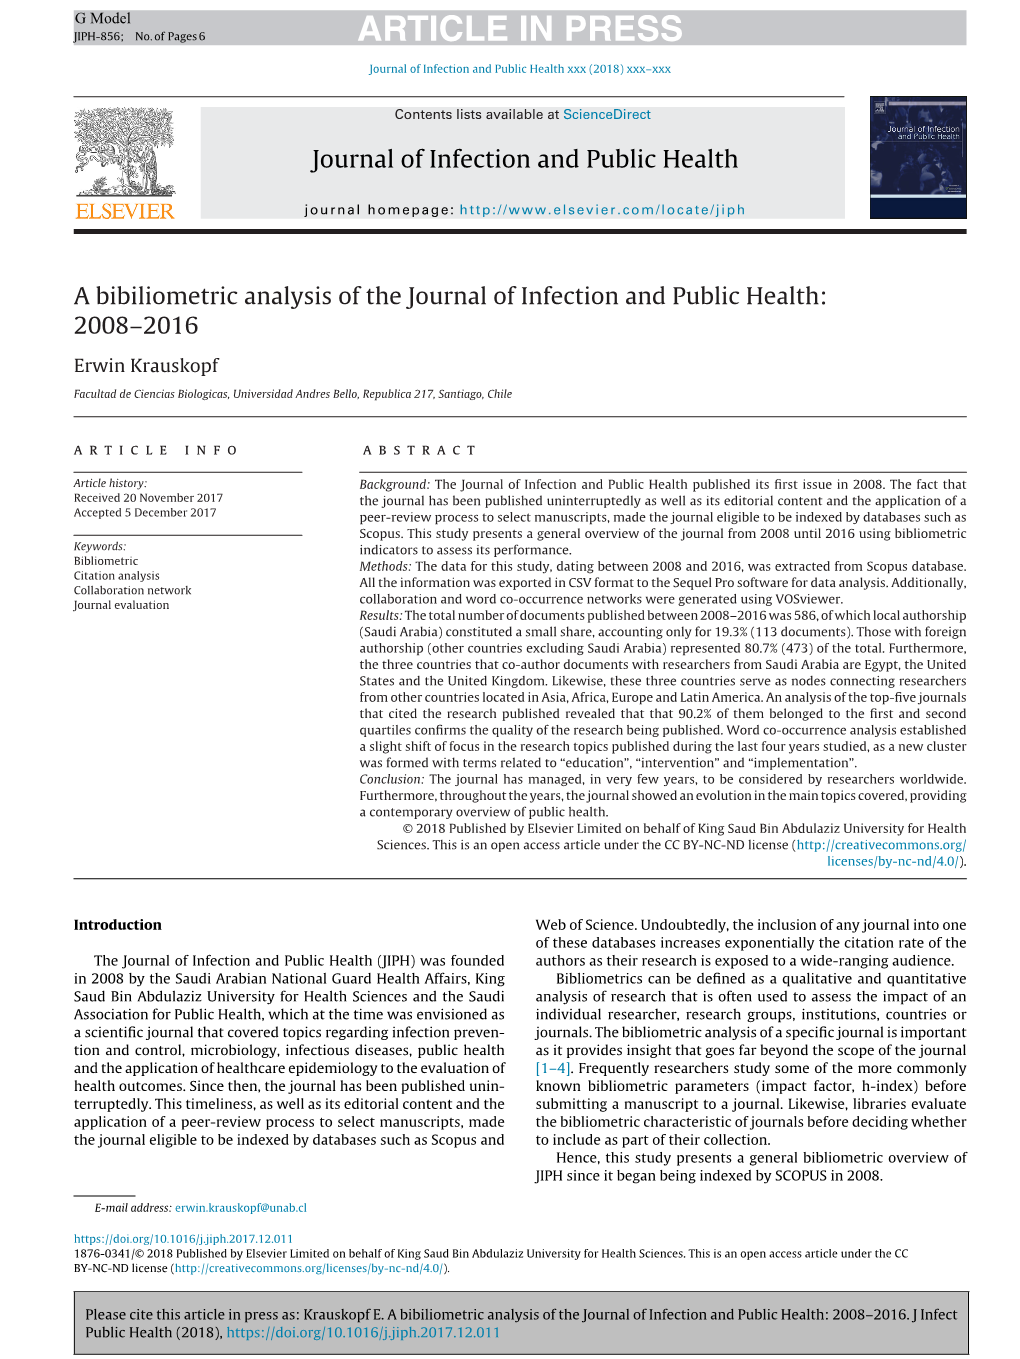 A Bibiliometric Analysis of the Journal of Infection and Public Health: 2008–2016